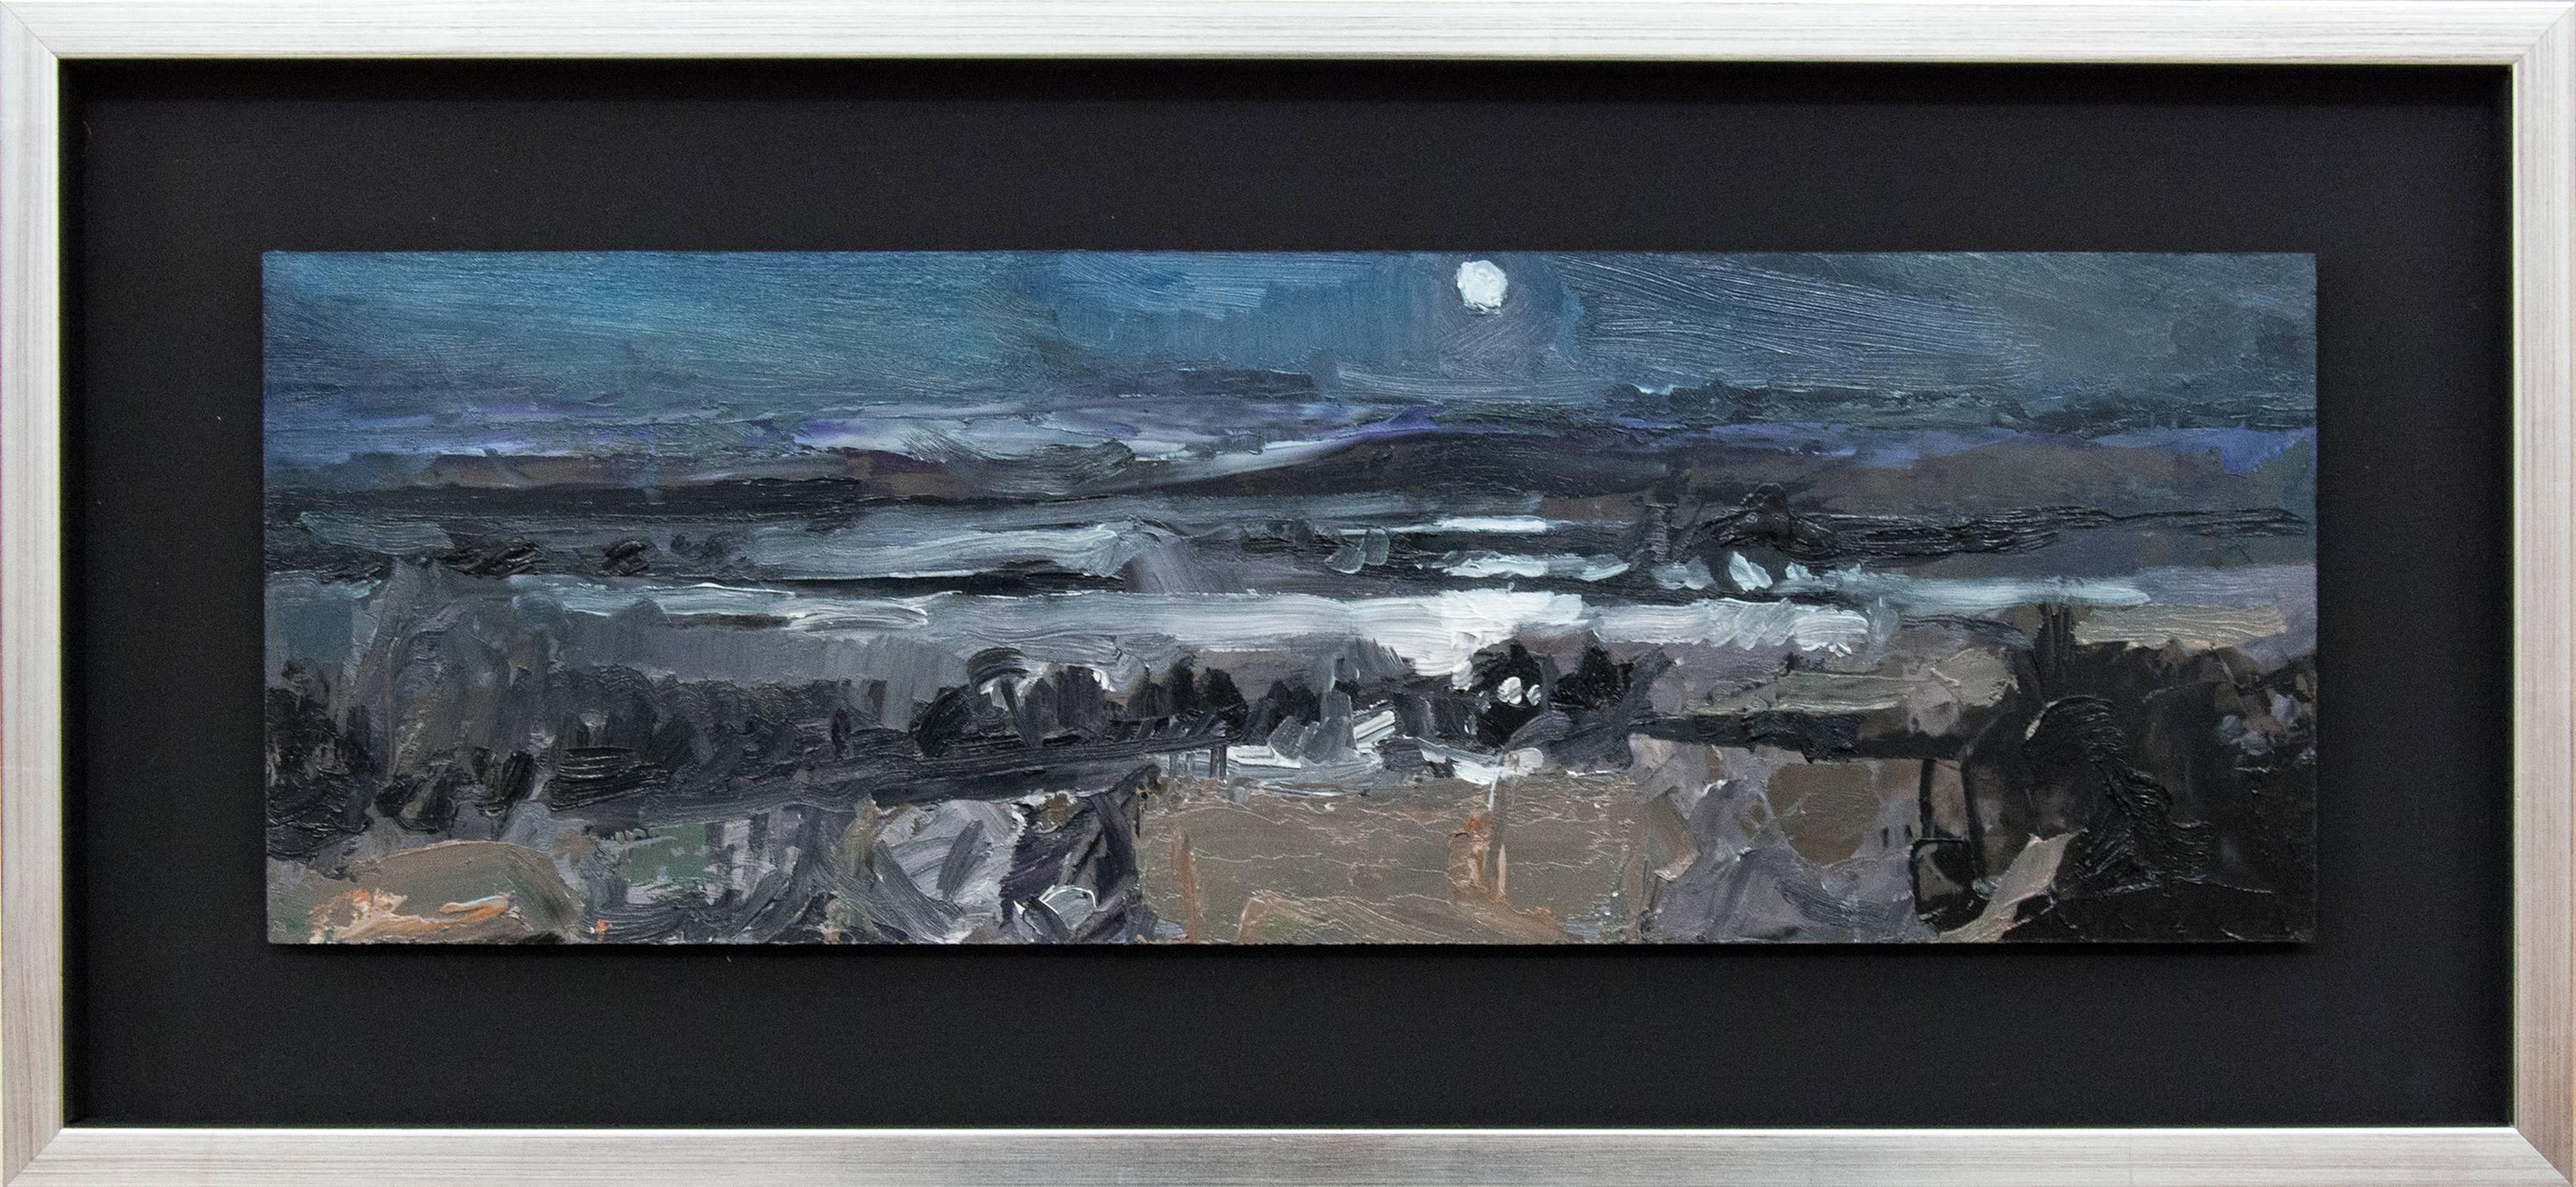 Nocturnal Winter Landscape - gestural, intimate impasto landscape - Painting by Simon Andrew